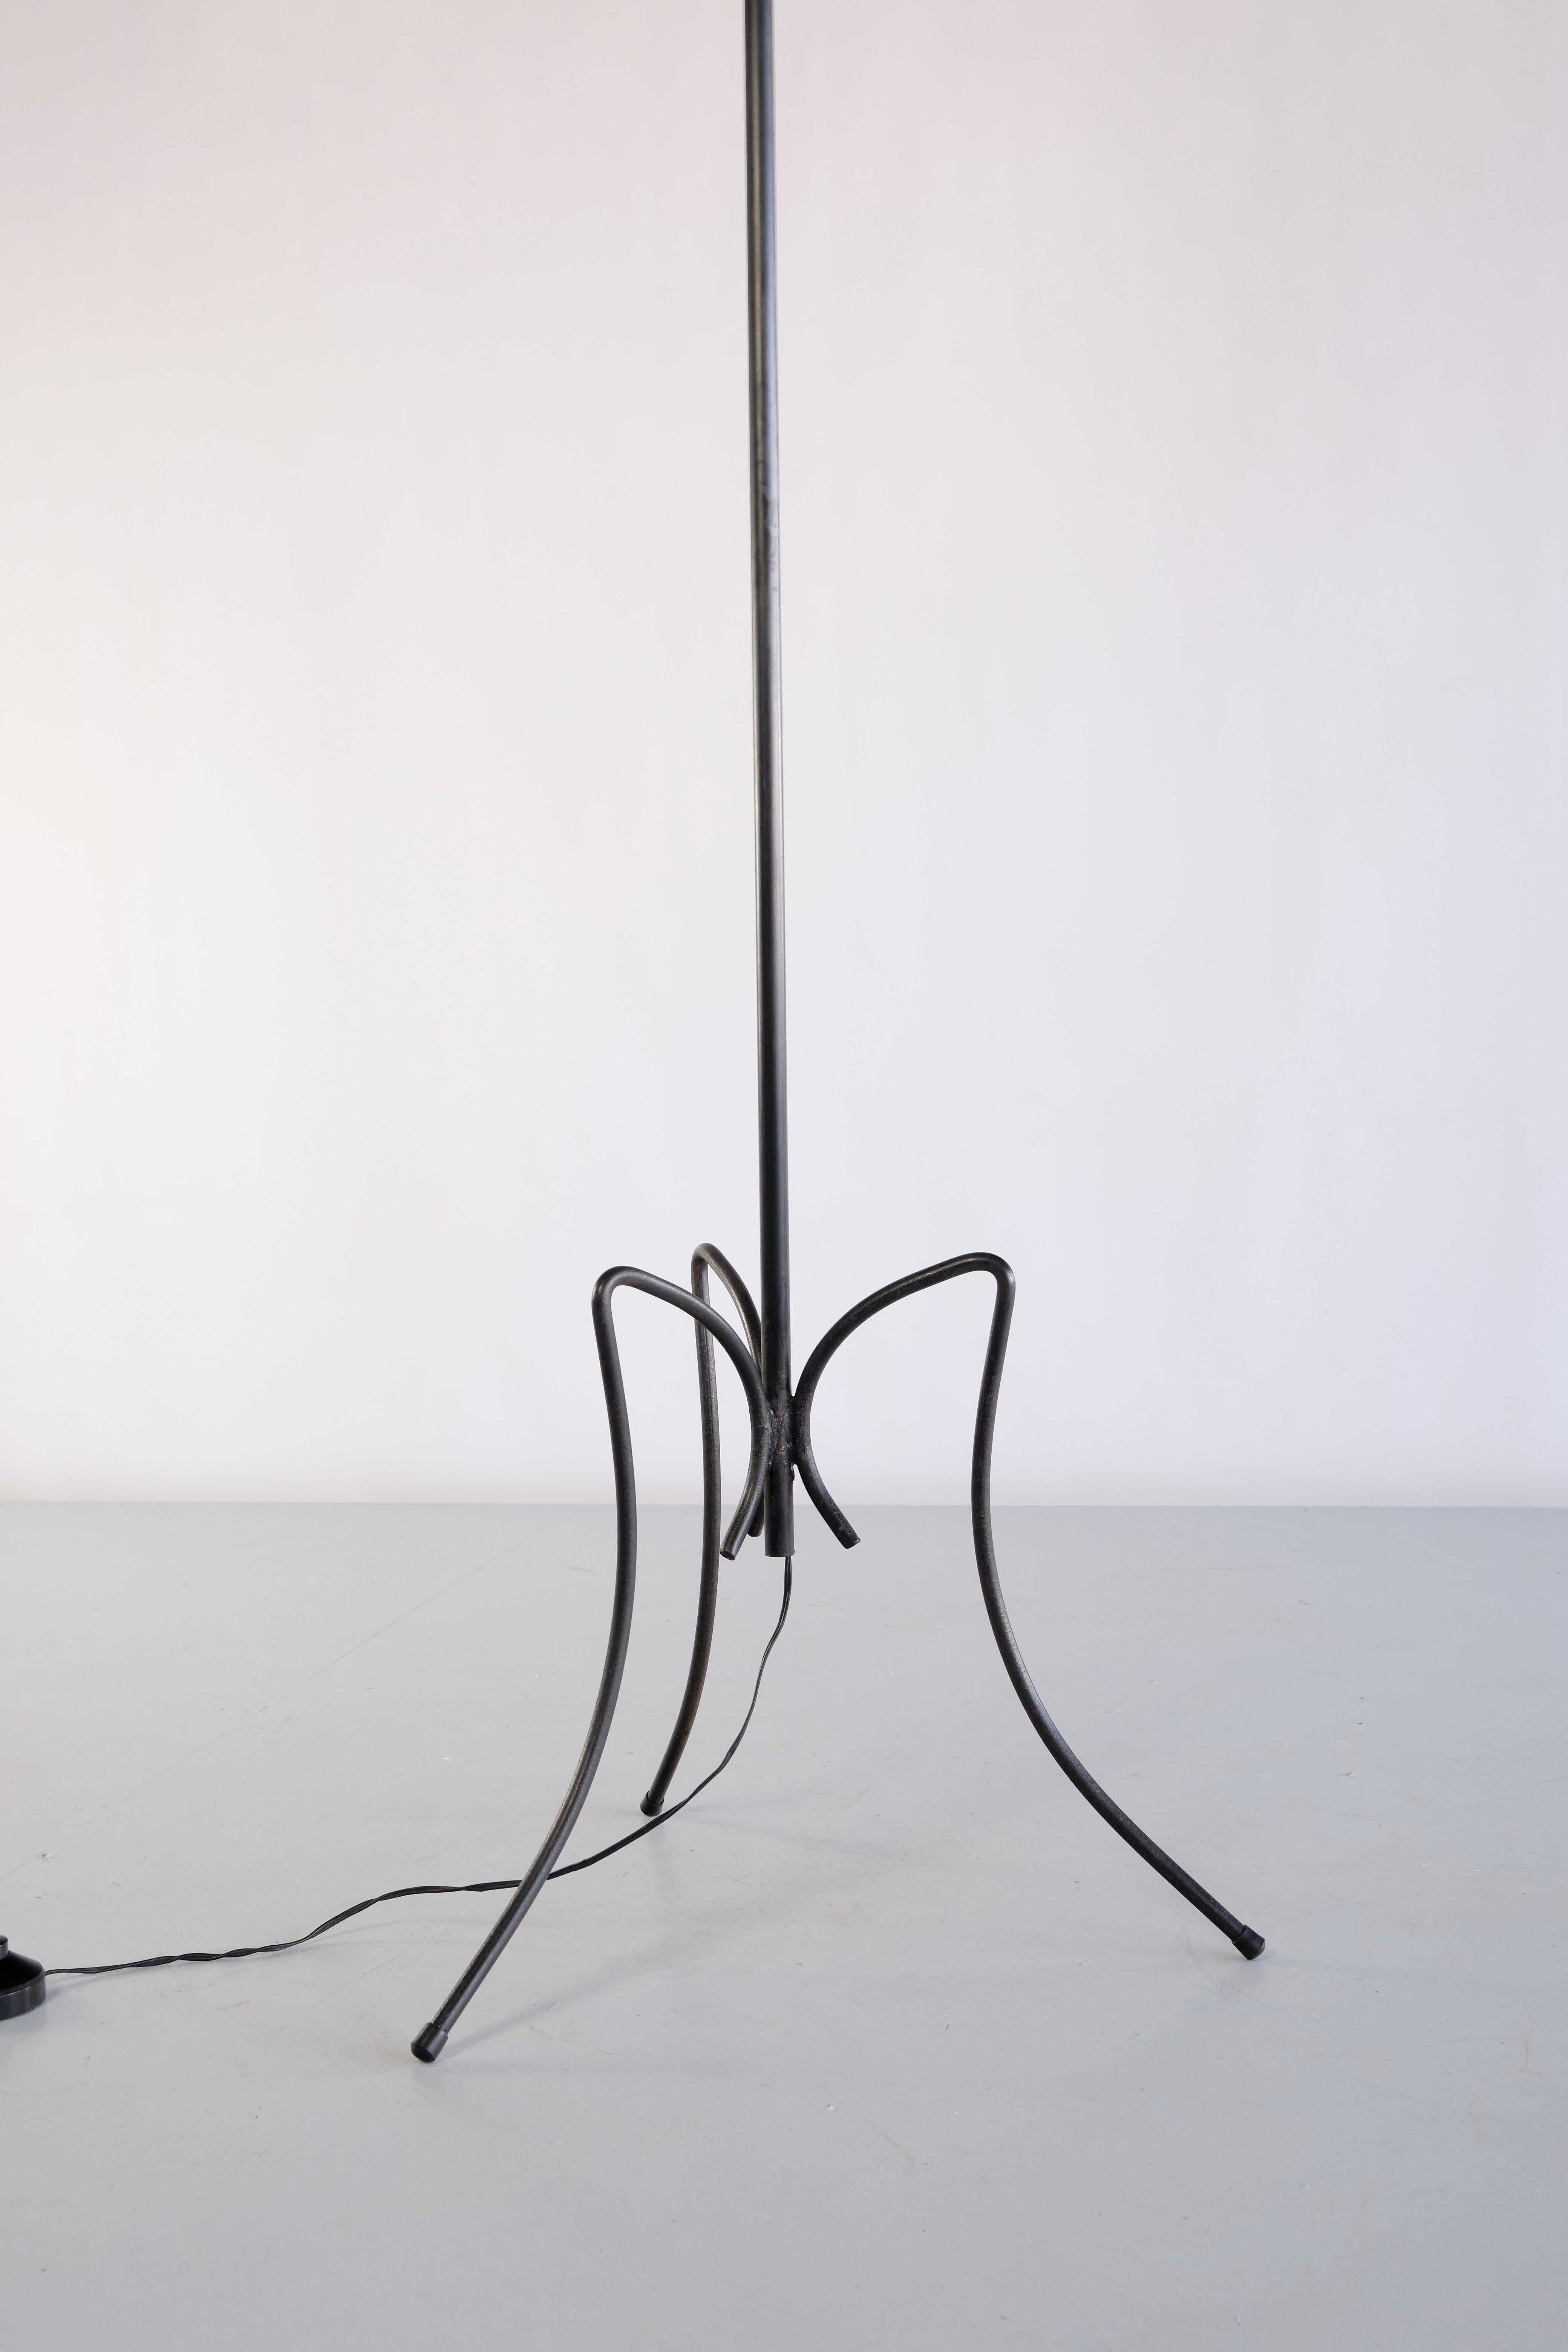 Mid-20th Century French Modern Three Legged Floor Lamp, Black Iron and Ivory Shade, 1950s For Sale